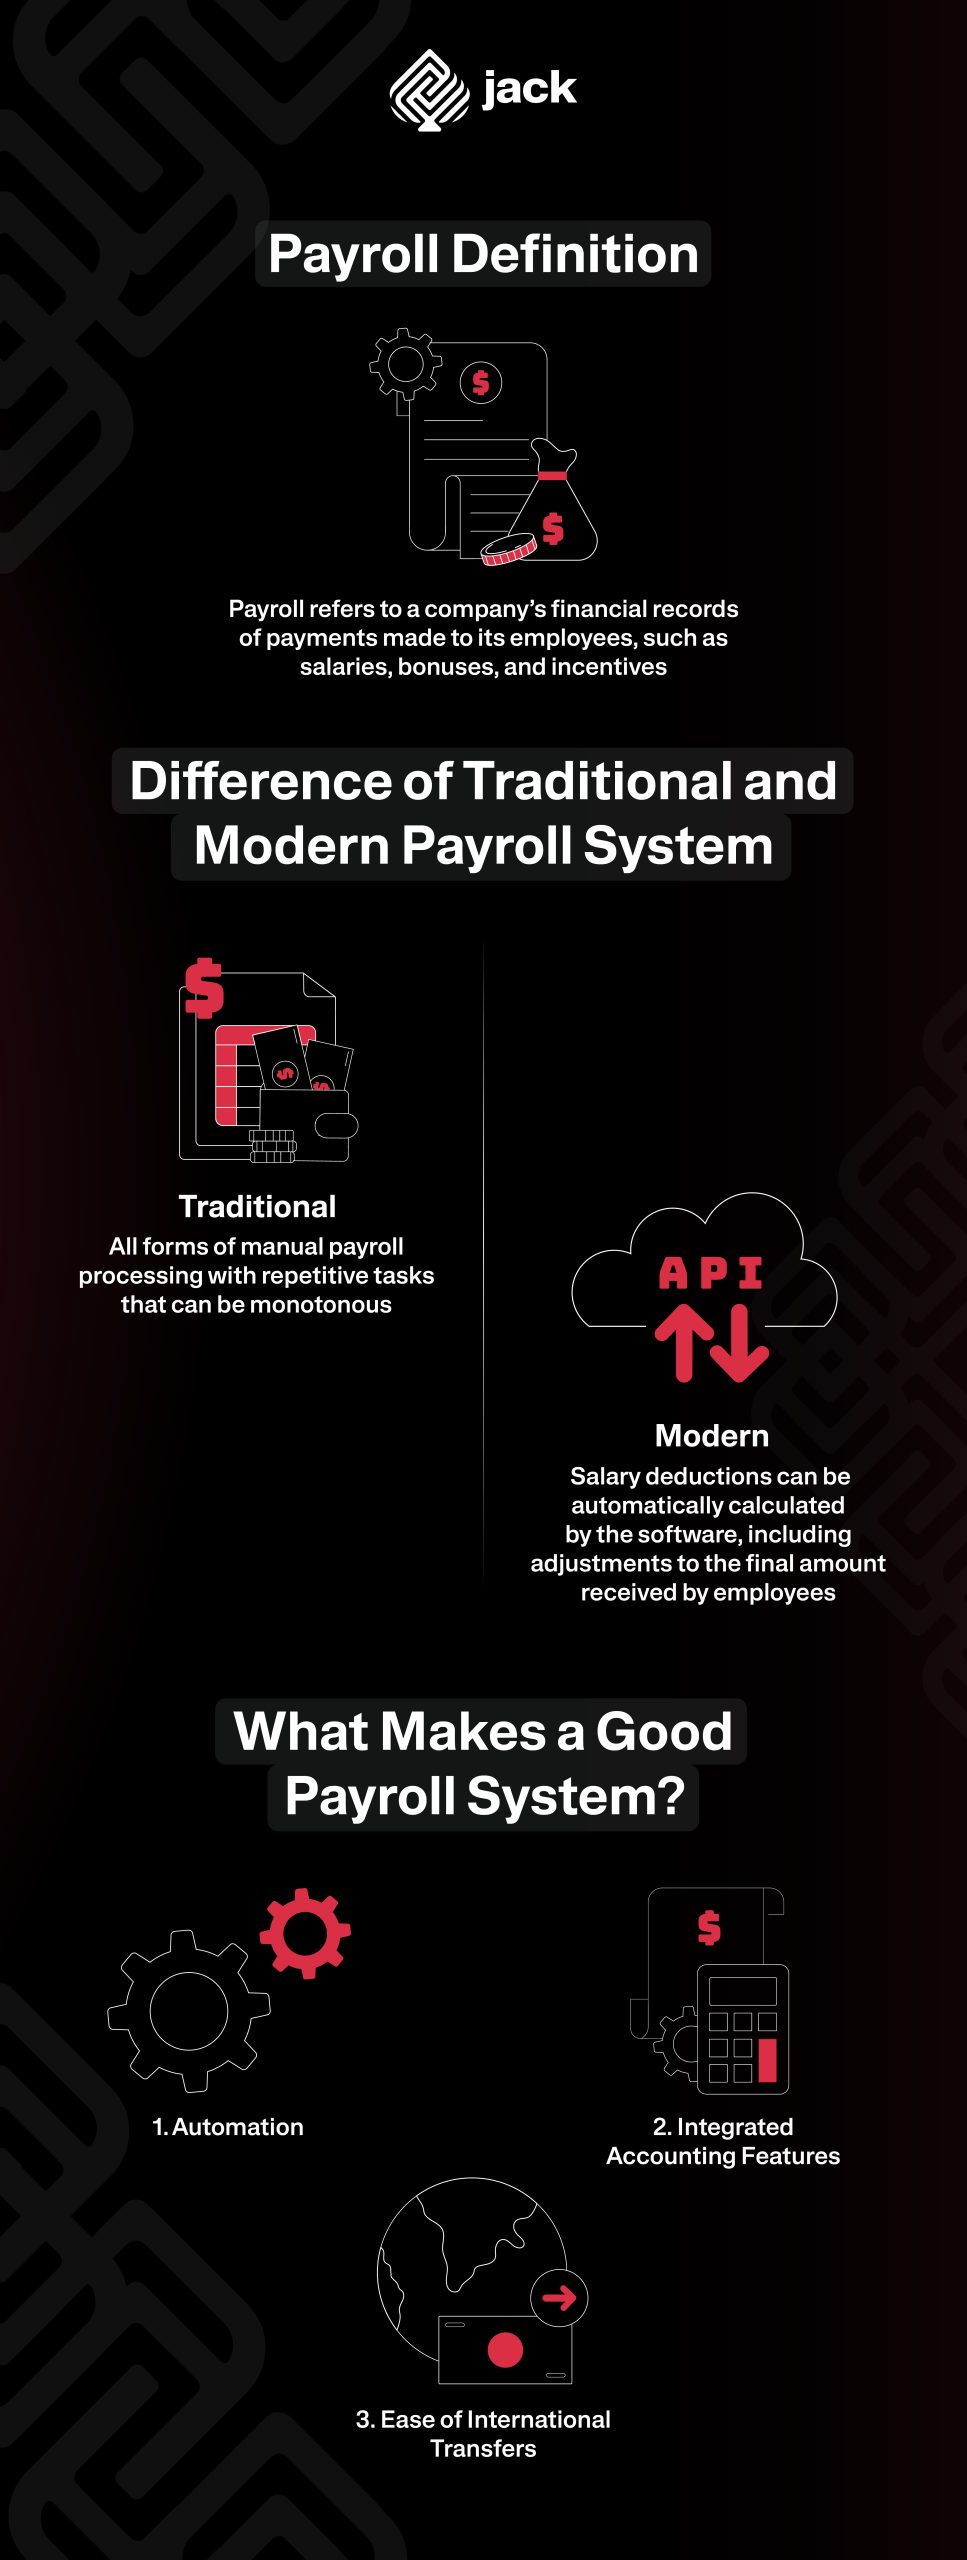 How to Effectively Manage Payroll Systems